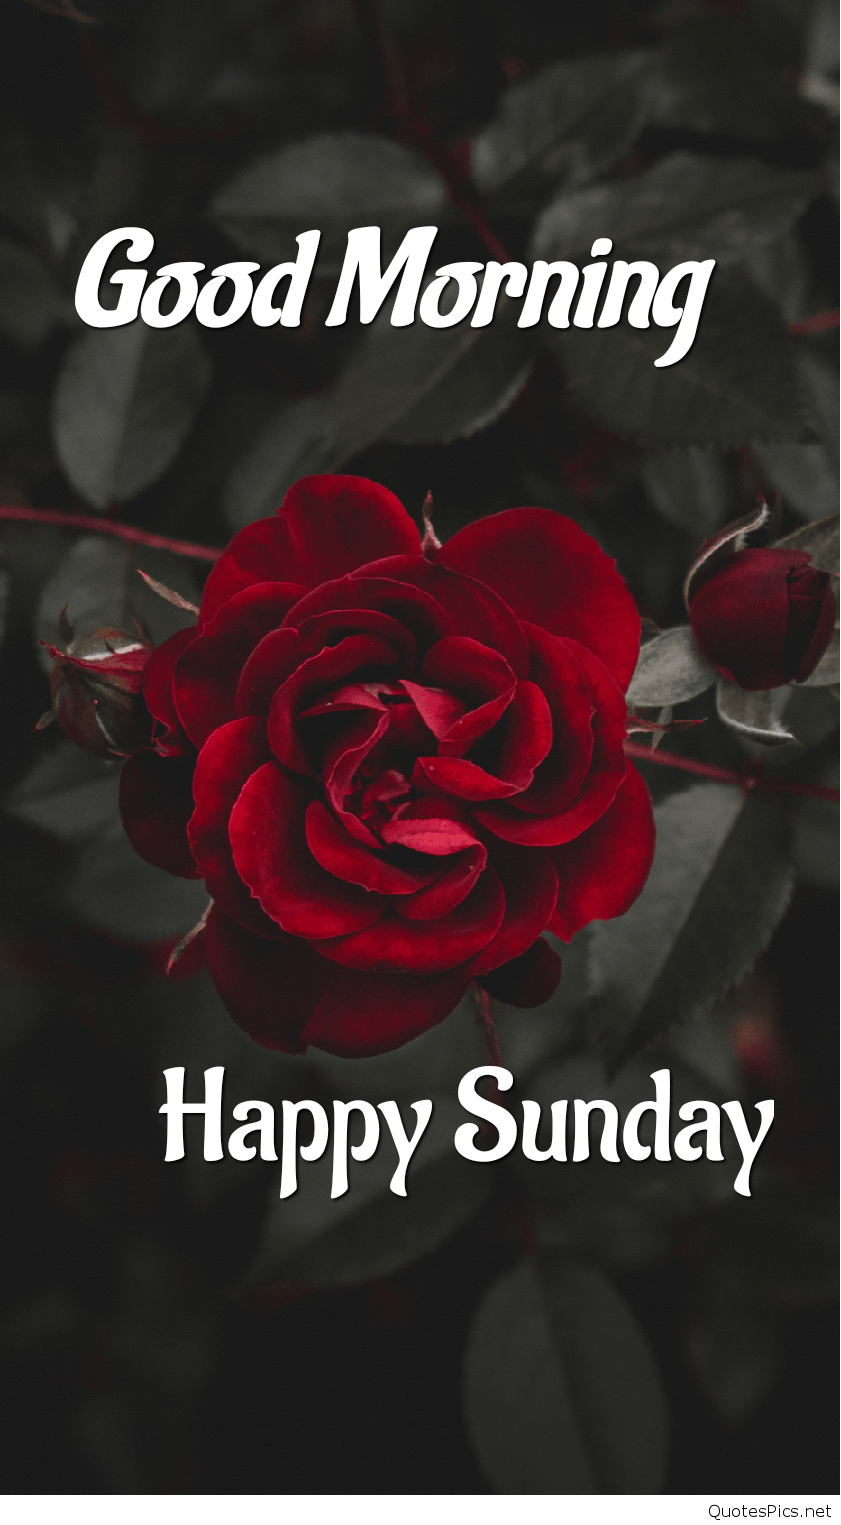 Good Morning - Happy Sunday | Rose Background Wallpaper Download ...